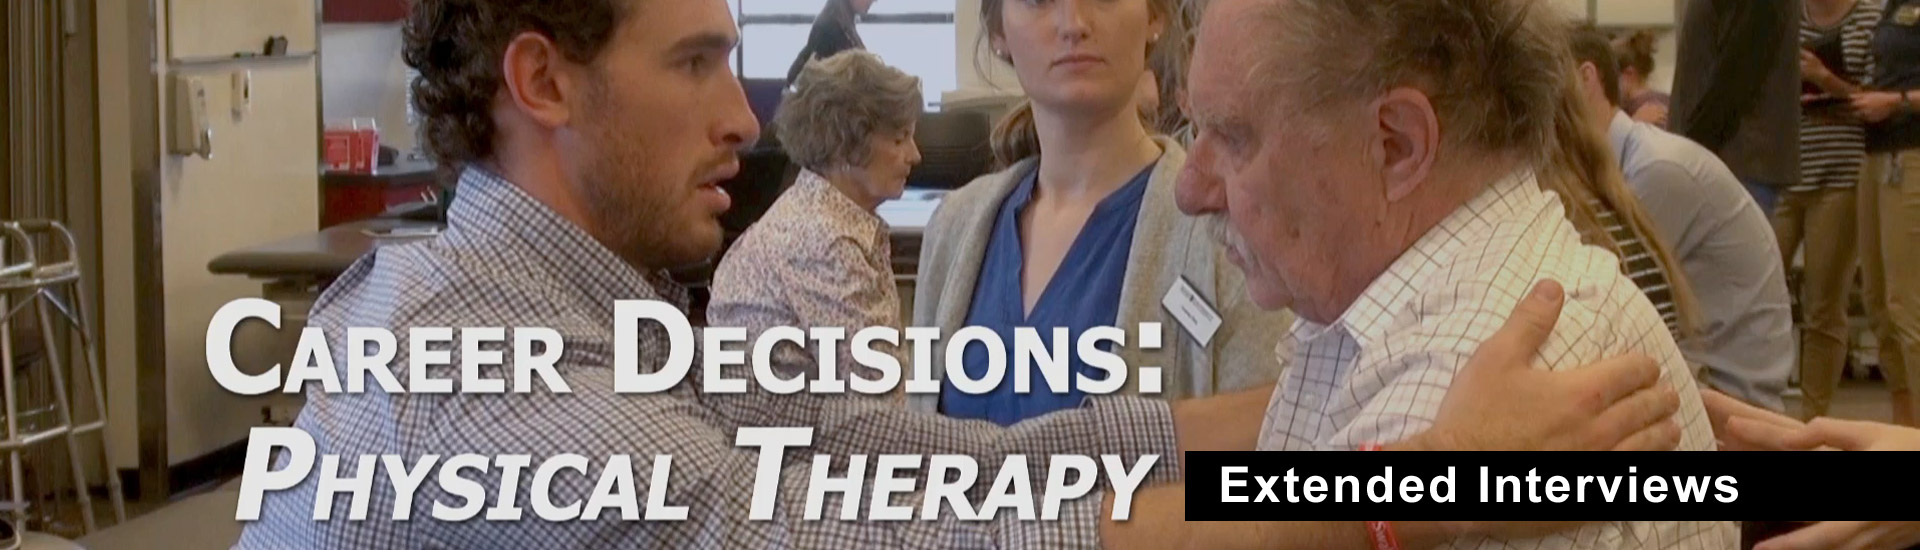 Career Decisions: Physical Therapy Extended Interviews